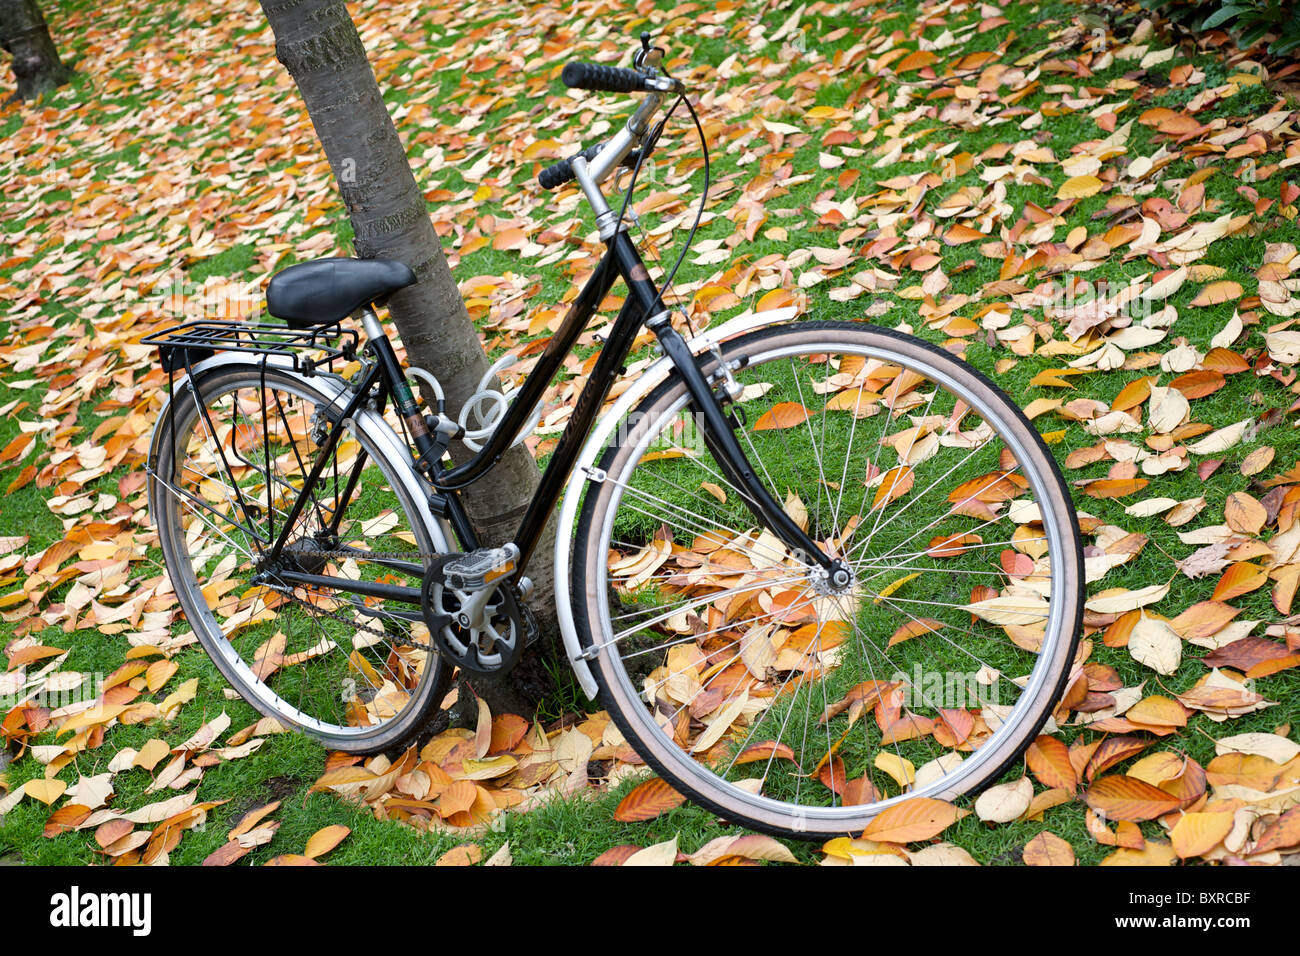 Chelsea Bicycle High Resolution Stock Photography and Images - Alamy